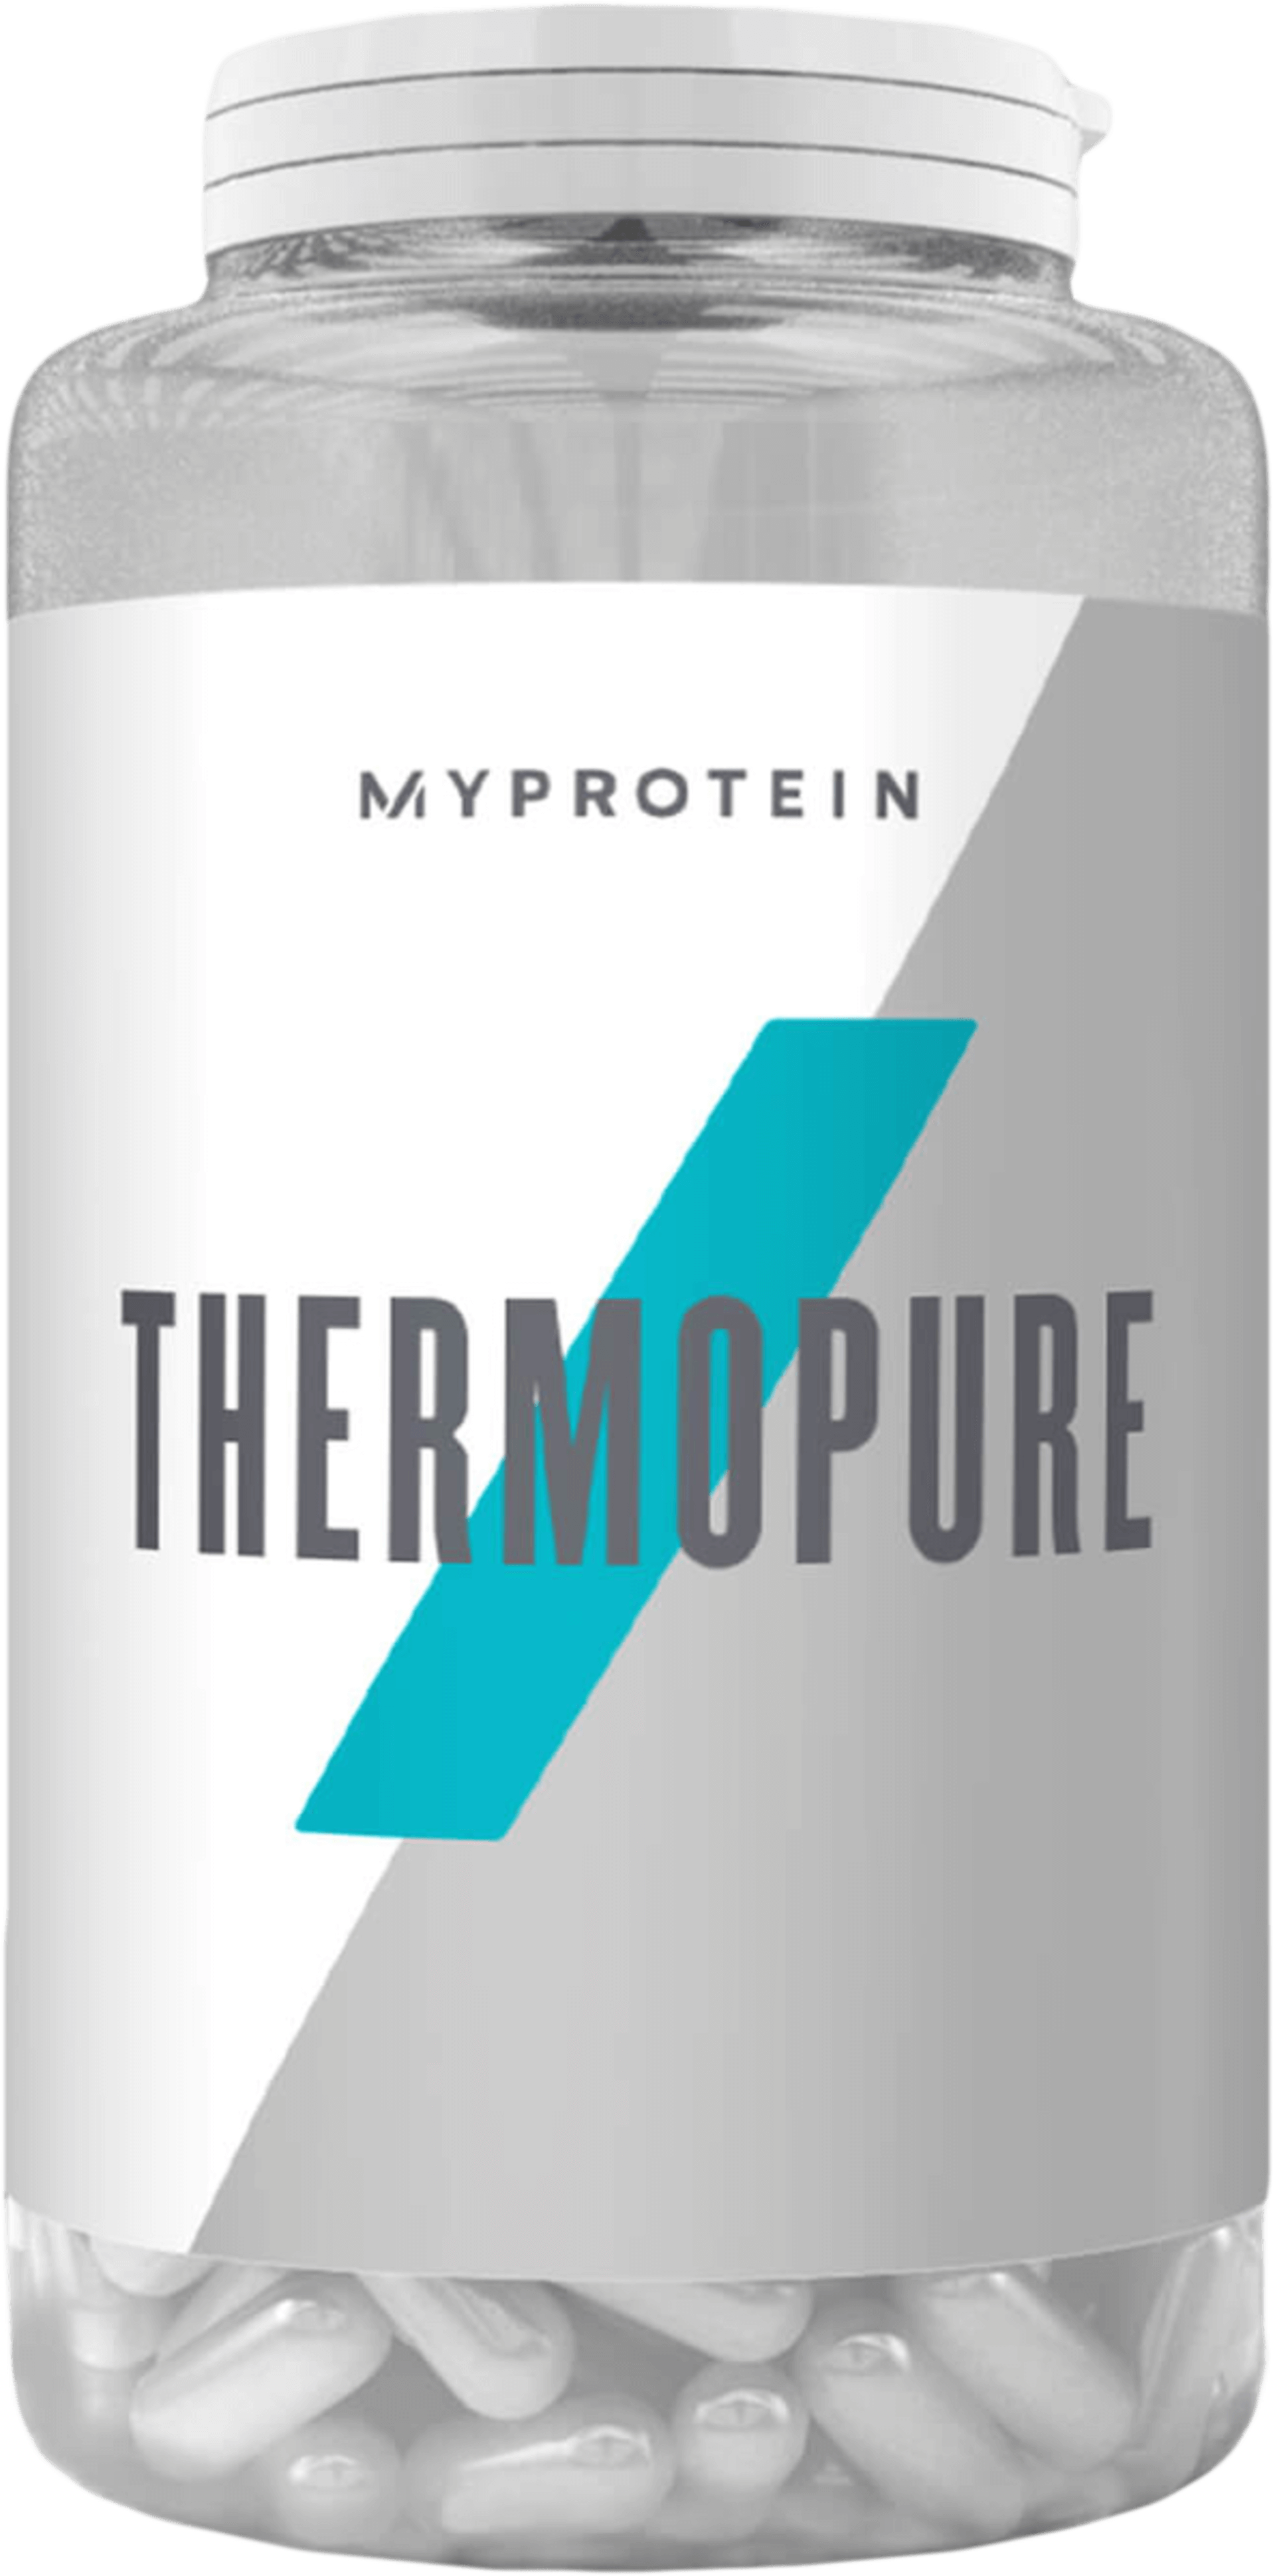 Myprotein Thermopure 90 tablet